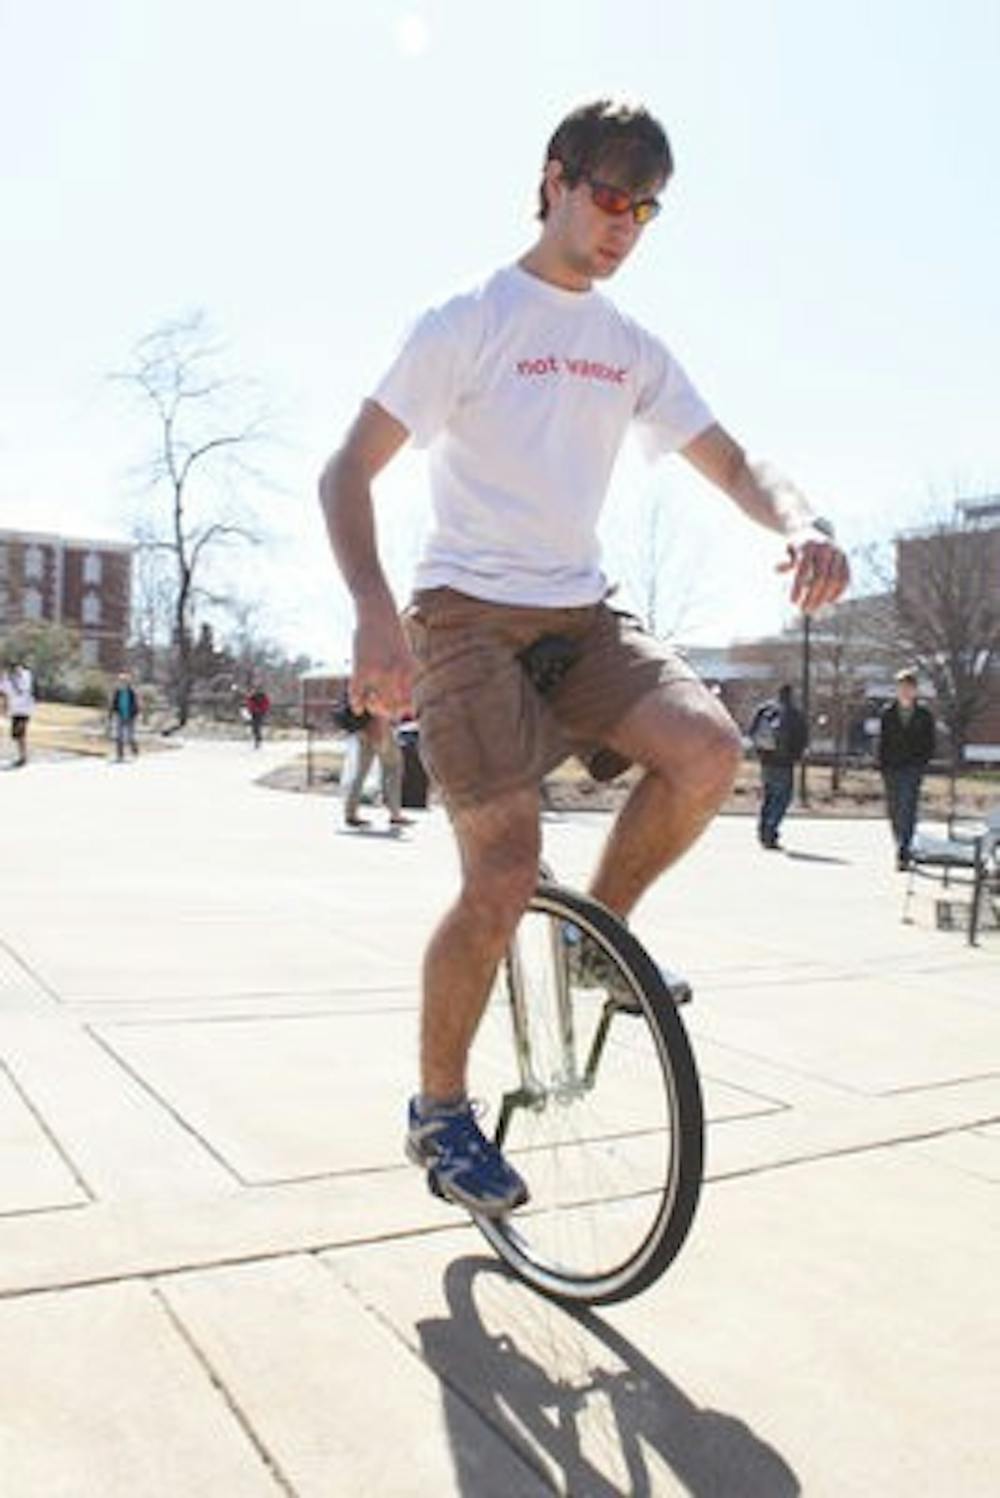 Kevin Tonn's interest in unicycling began after a friend of his opened his eyes to the world of carnival talents. Jared Waters / ASSISTANT PHOTO EDITOR